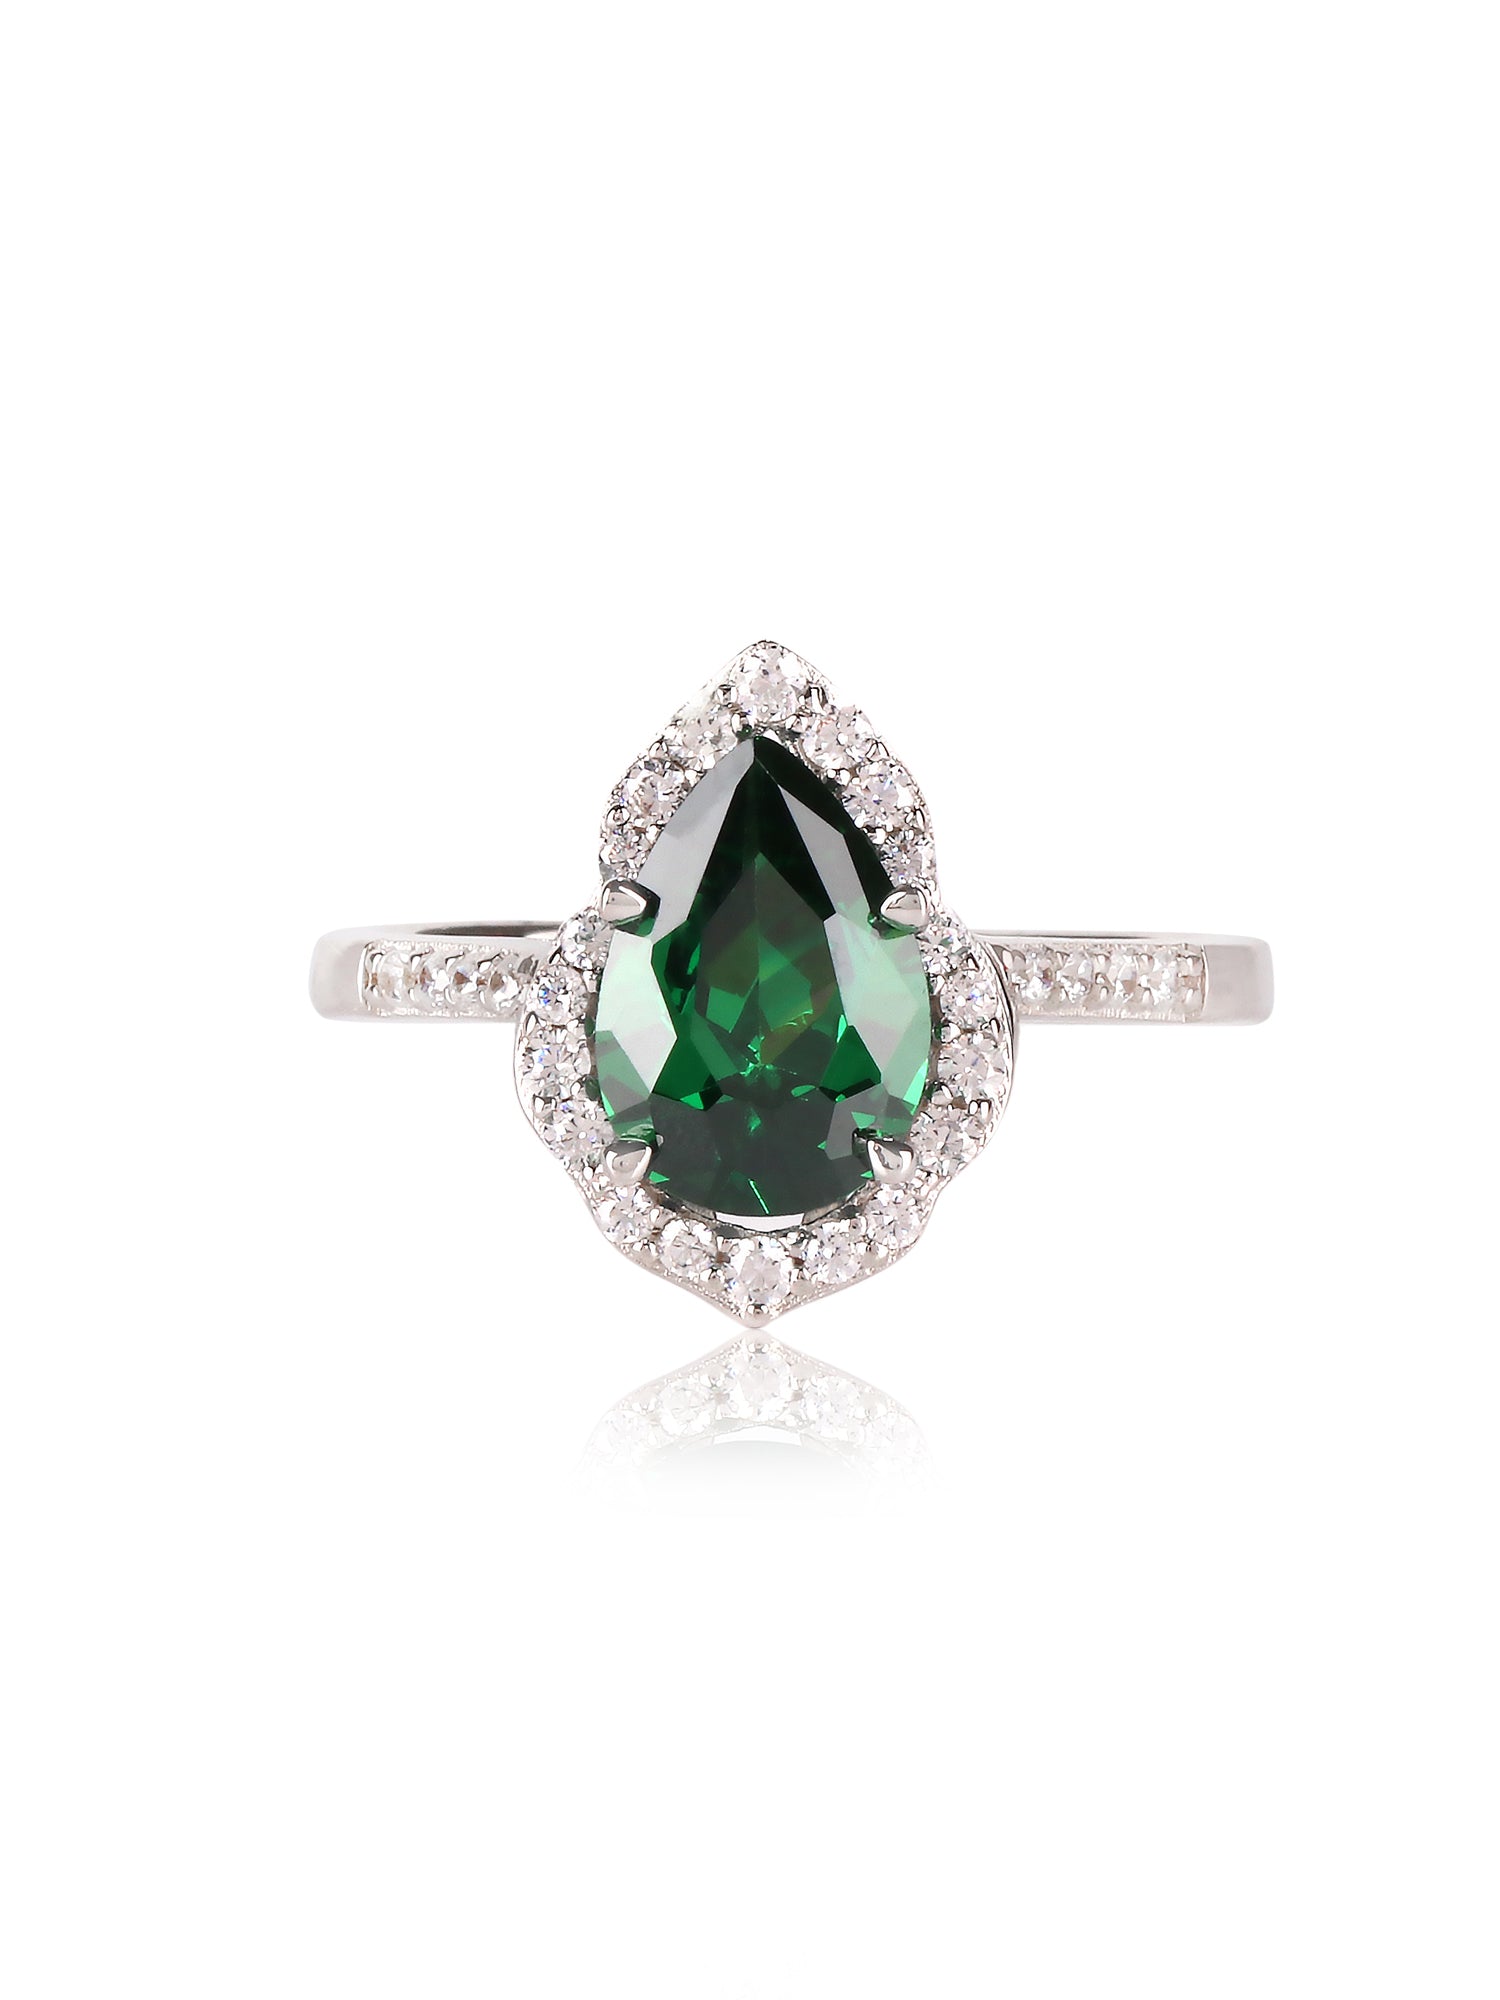 EMERALD PEAR SHAPED SIMPLE RING